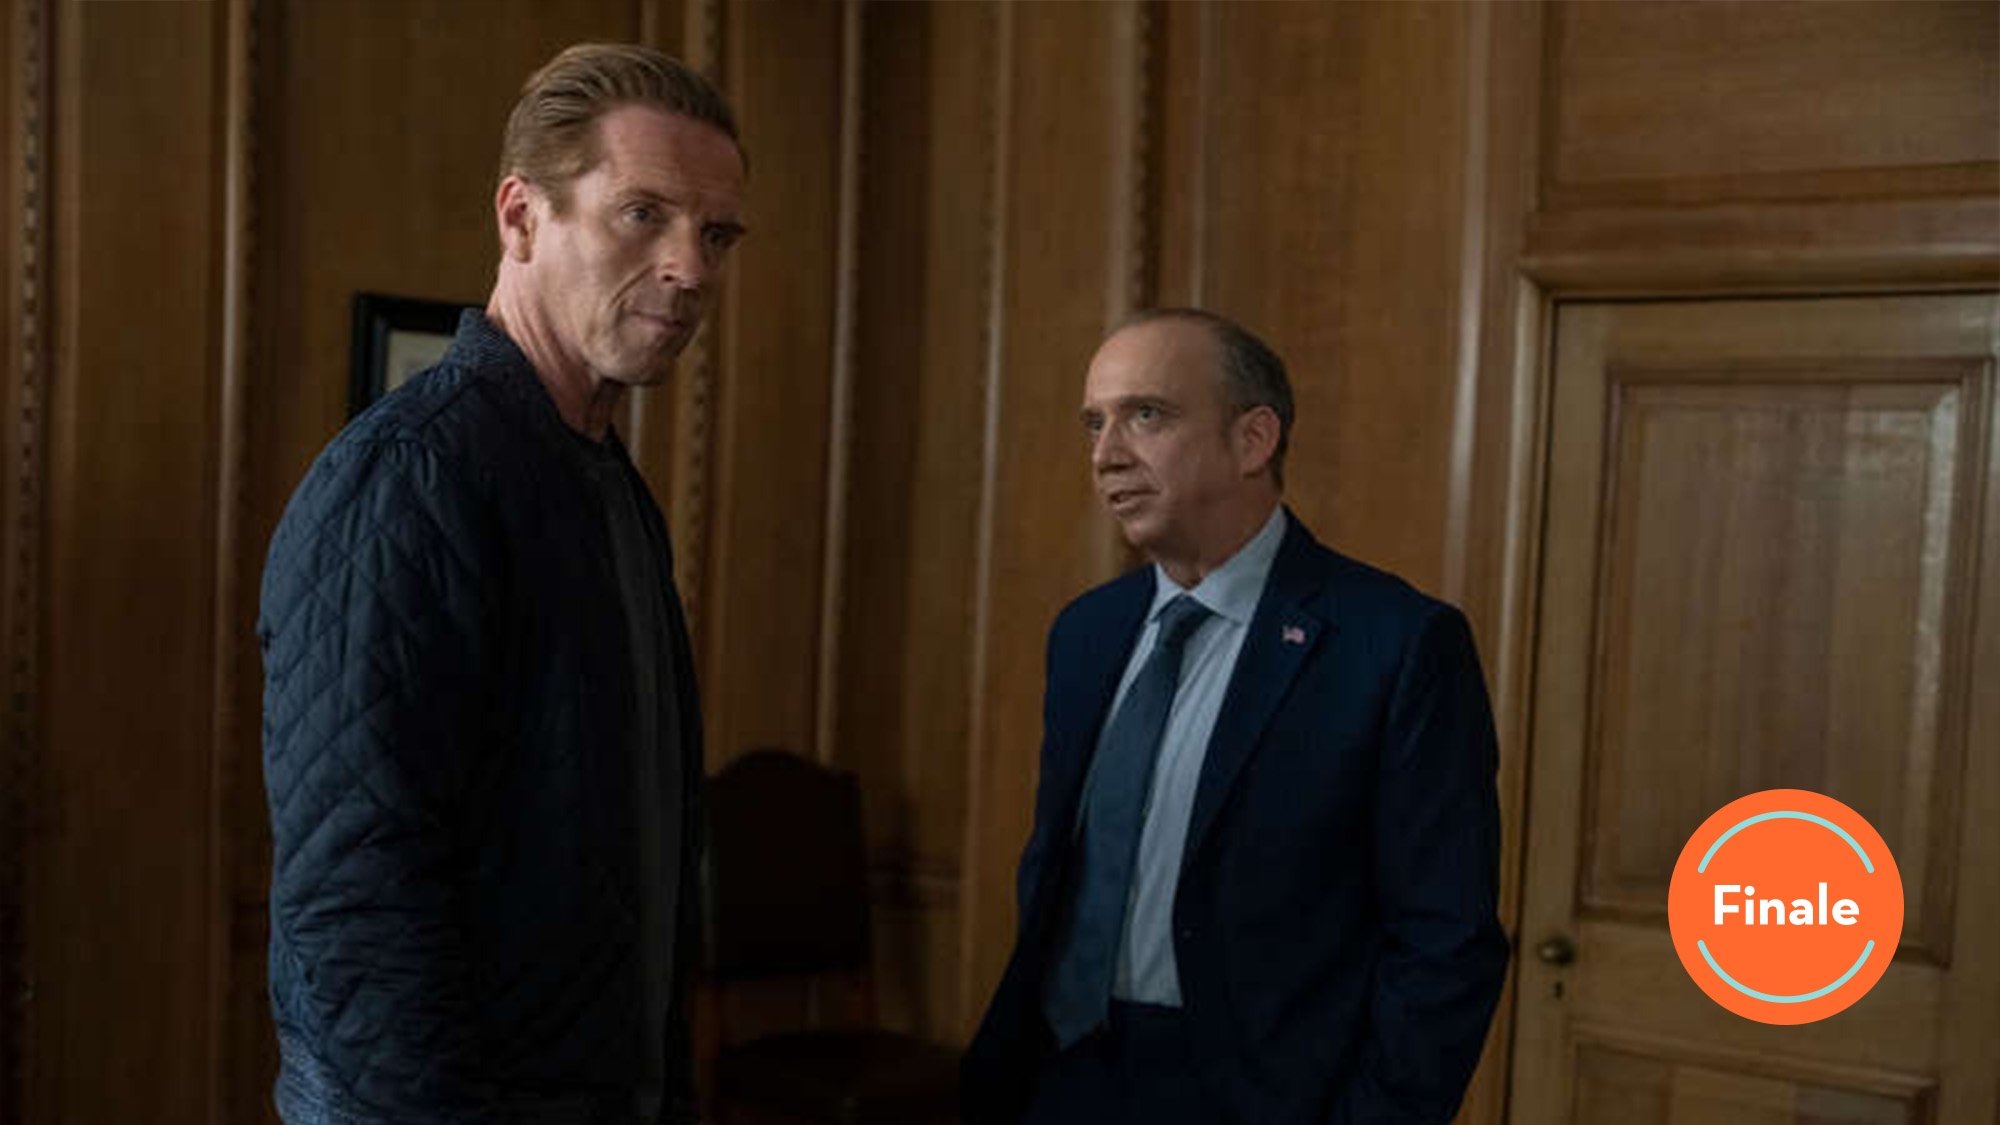 Chuck and Axe are both outplayed in the Billions season finale